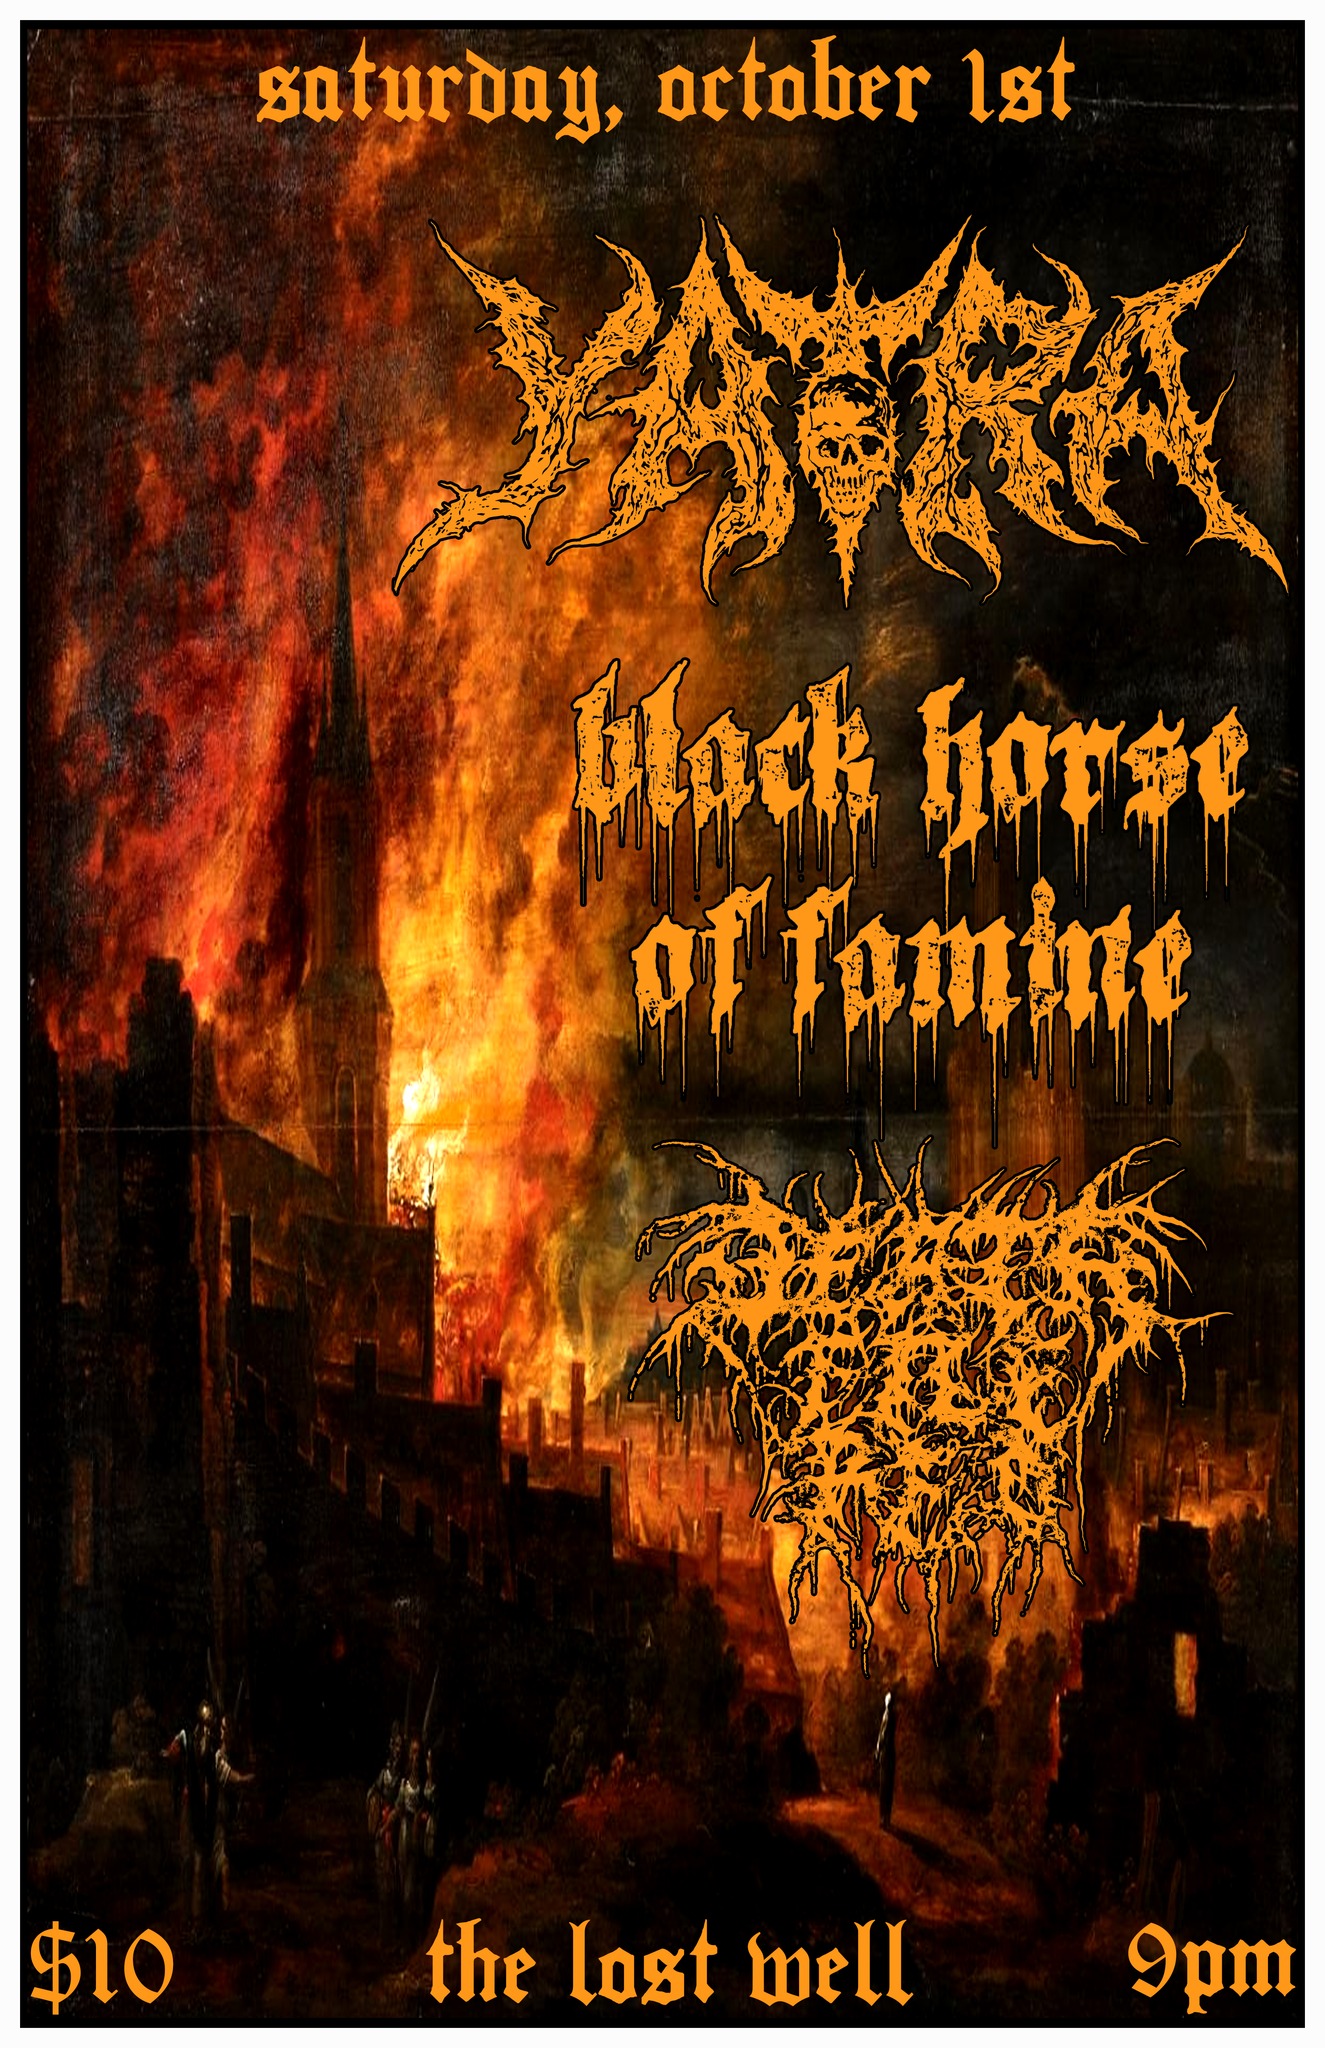 Yatra, Black Horse of Famine, Death File Red